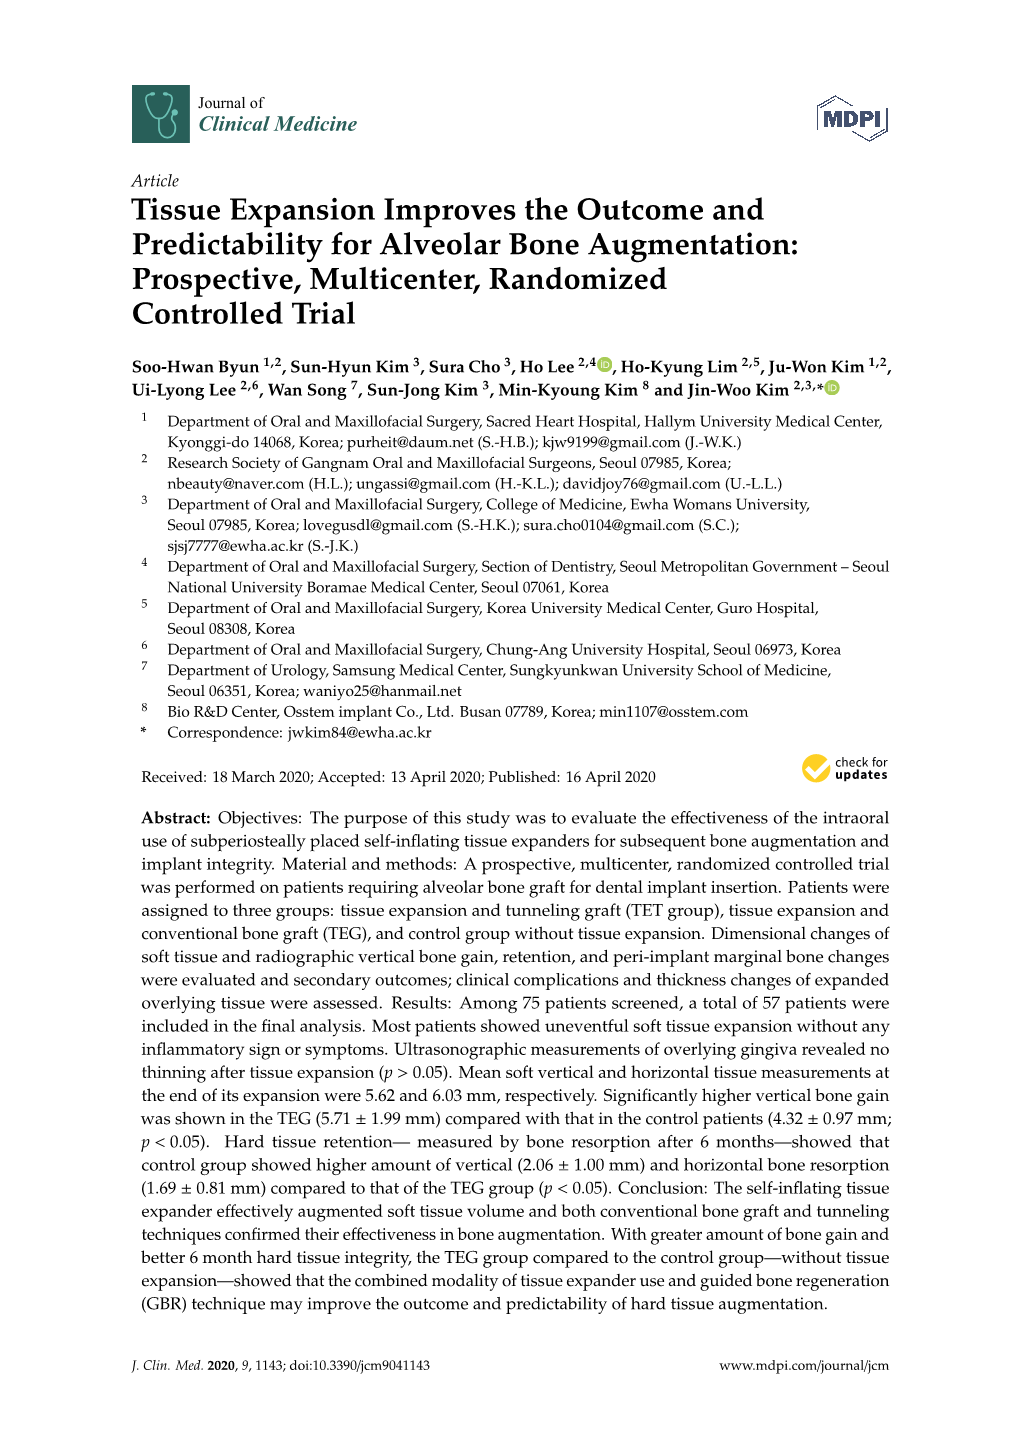 Tissue Expansion Improves the Outcome and Predictability for Alveolar Bone Augmentation: Prospective, Multicenter, Randomized Controlled Trial